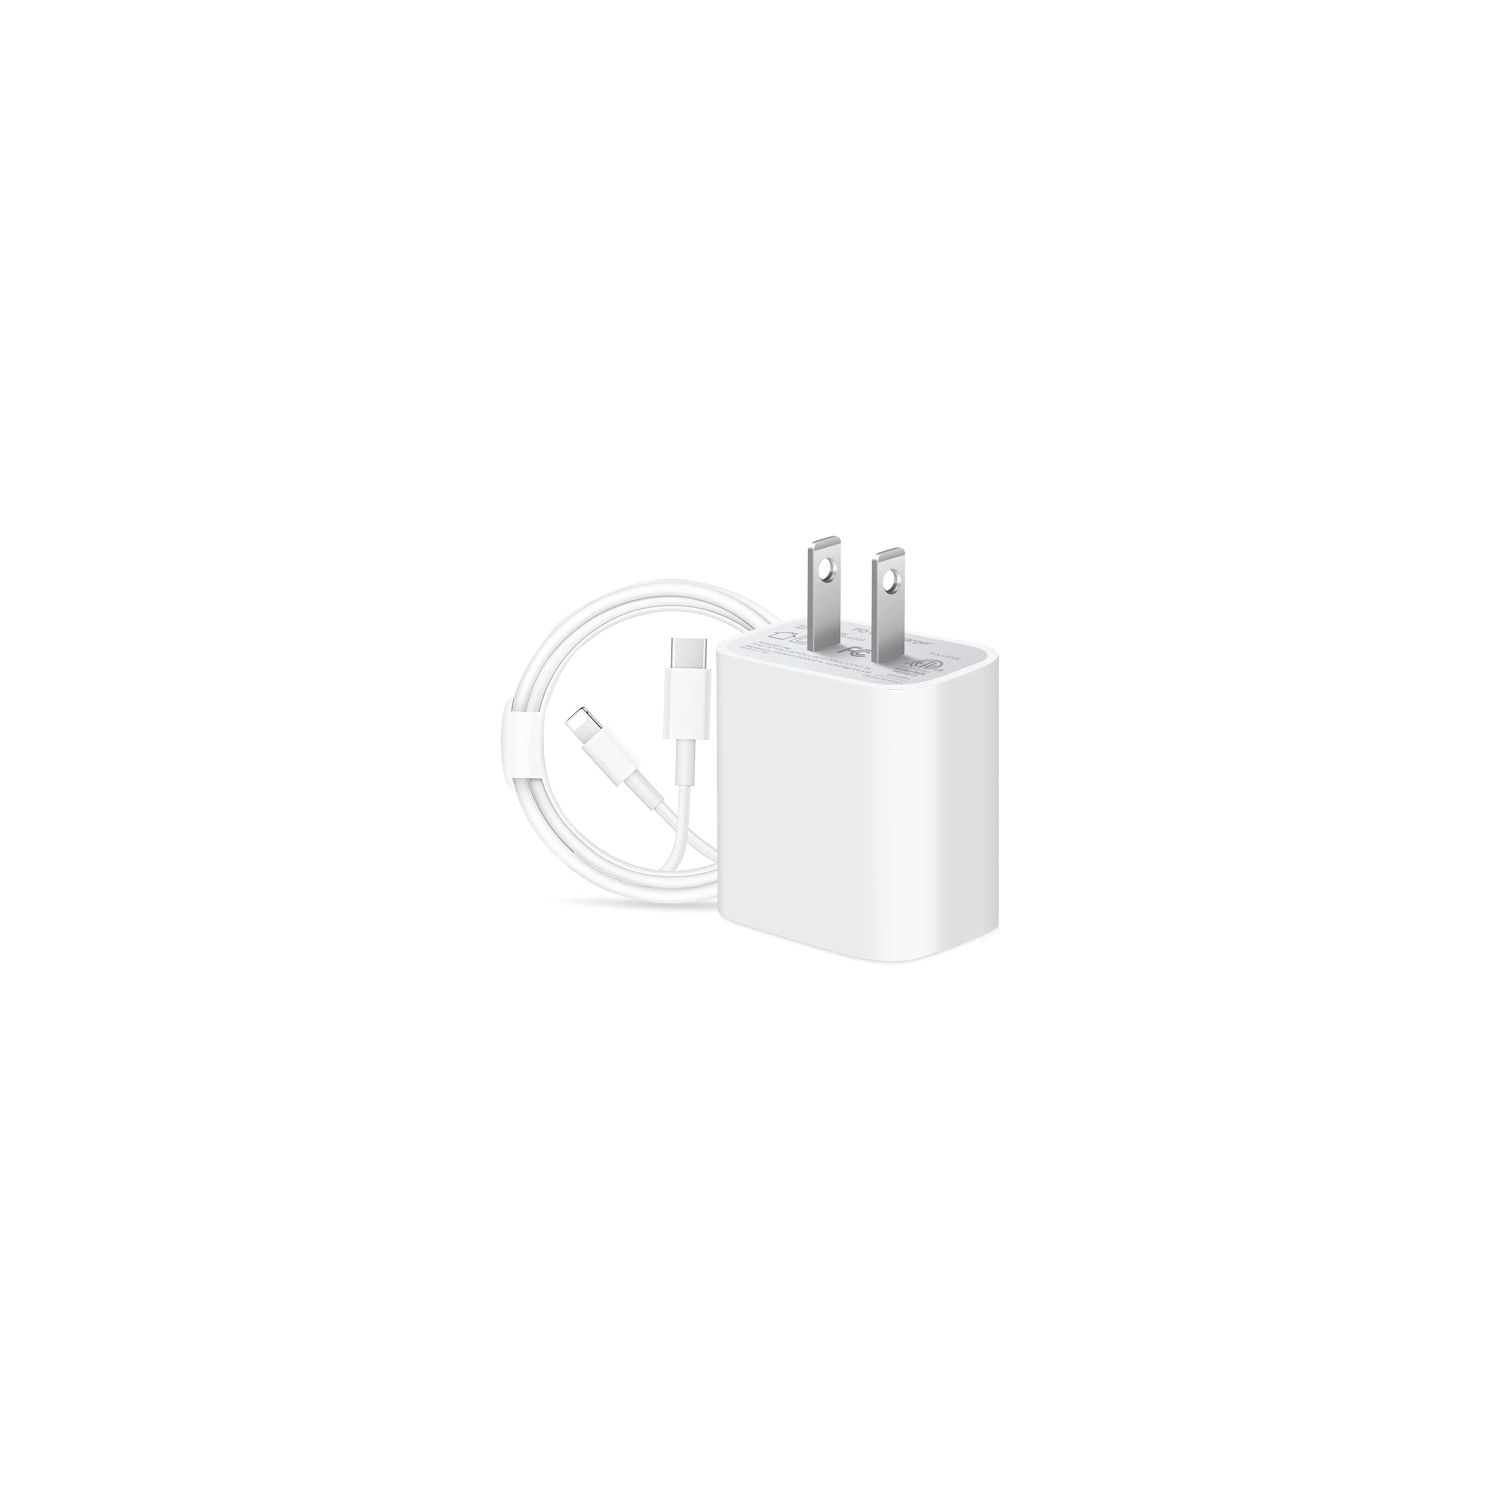 iPhone Fast Charger 20W | Wall Block USB Type C Adapter Cube Compatible with Apple iPhone 14, 13, 12, 11 Pro Max, XR, XS, iPad with Charging Cable Cord